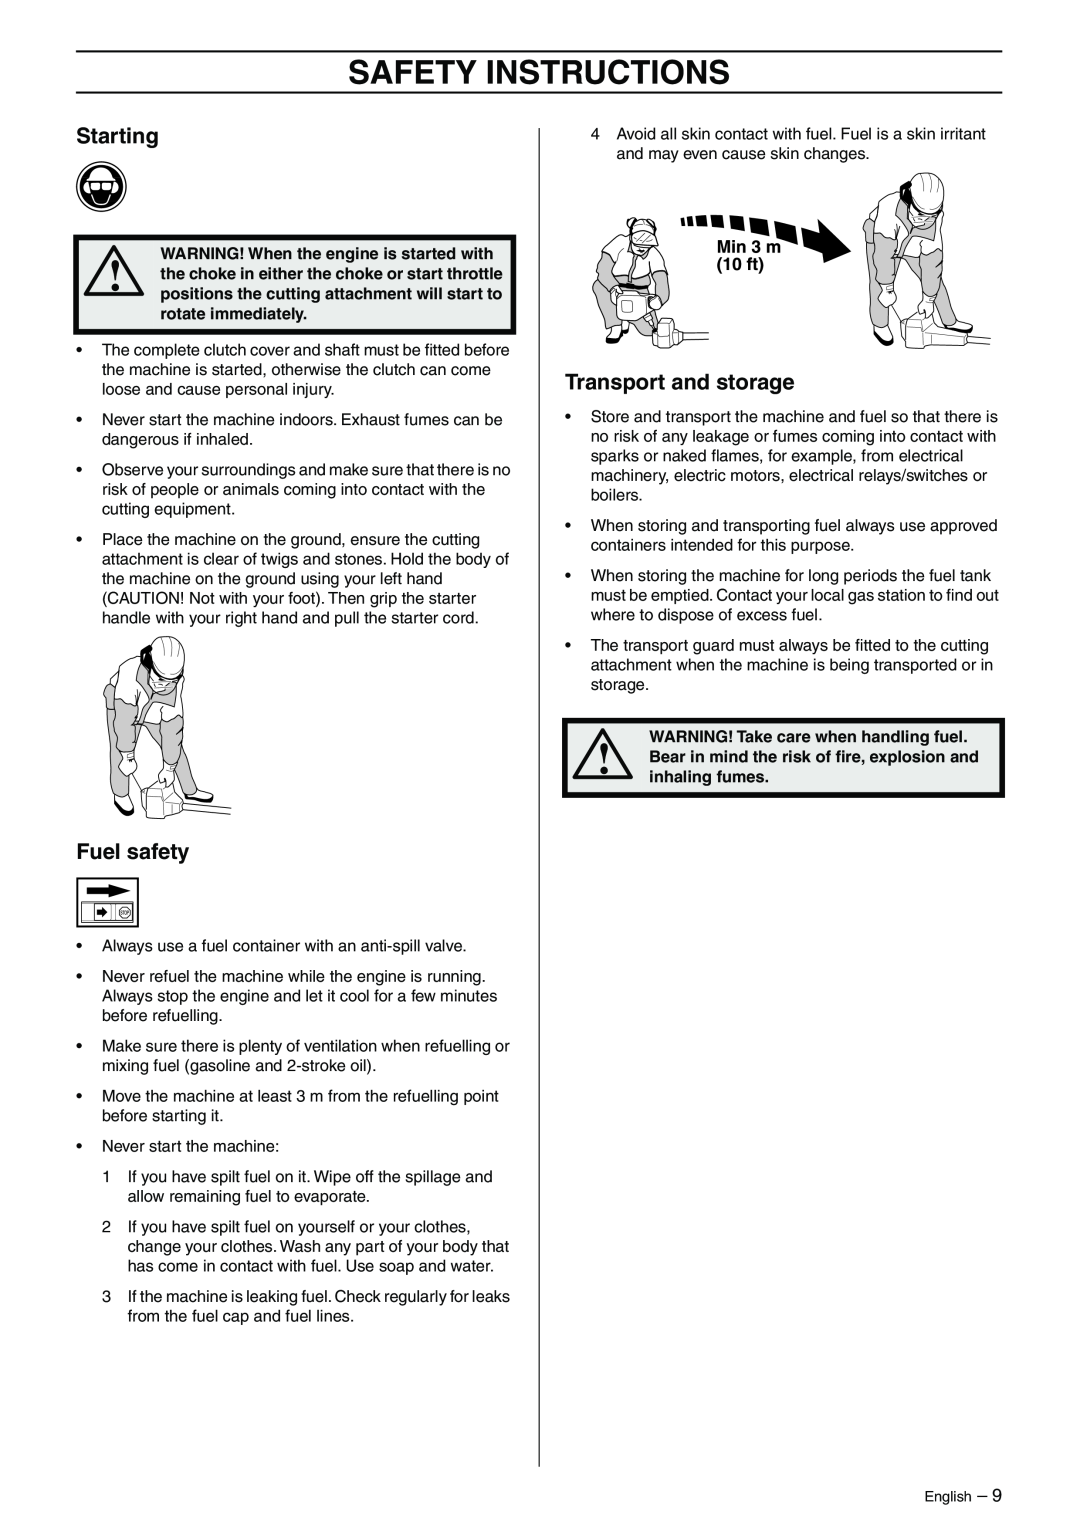 Husqvarna 325RJ Safety Instructions, Starting, Fuel safety, Transport and storage, WARNING! Take care when handling fuel 